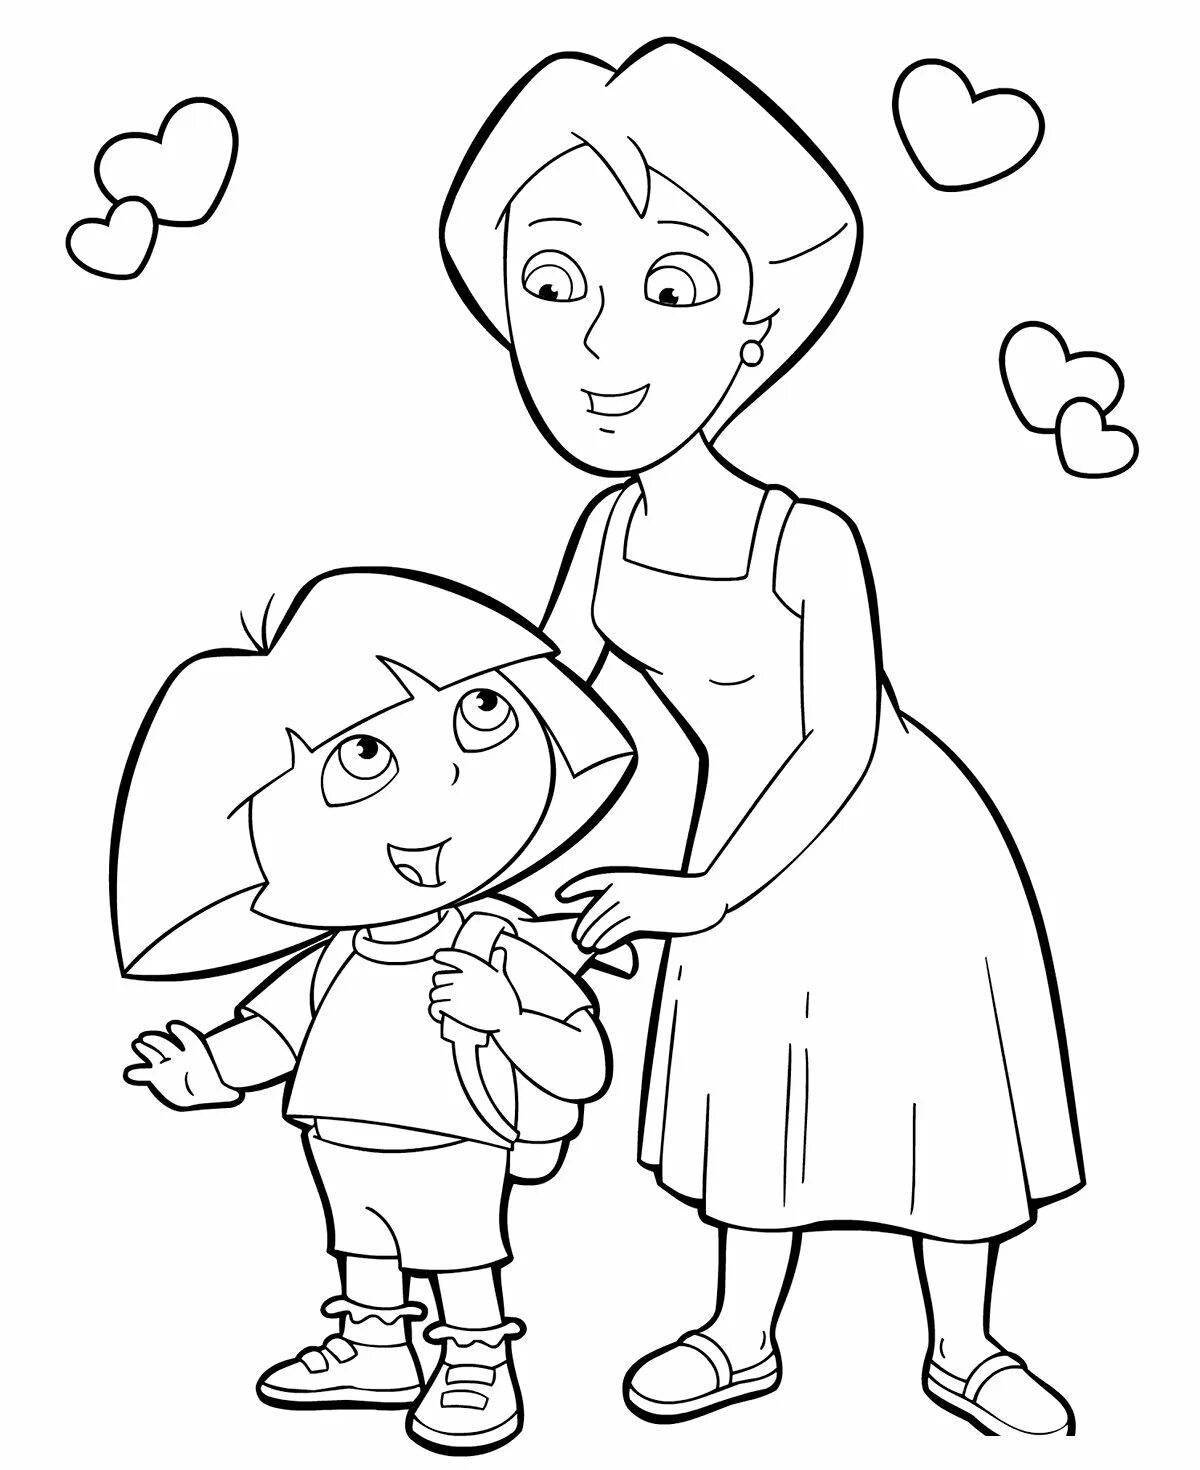 Live mom and baby coloring book